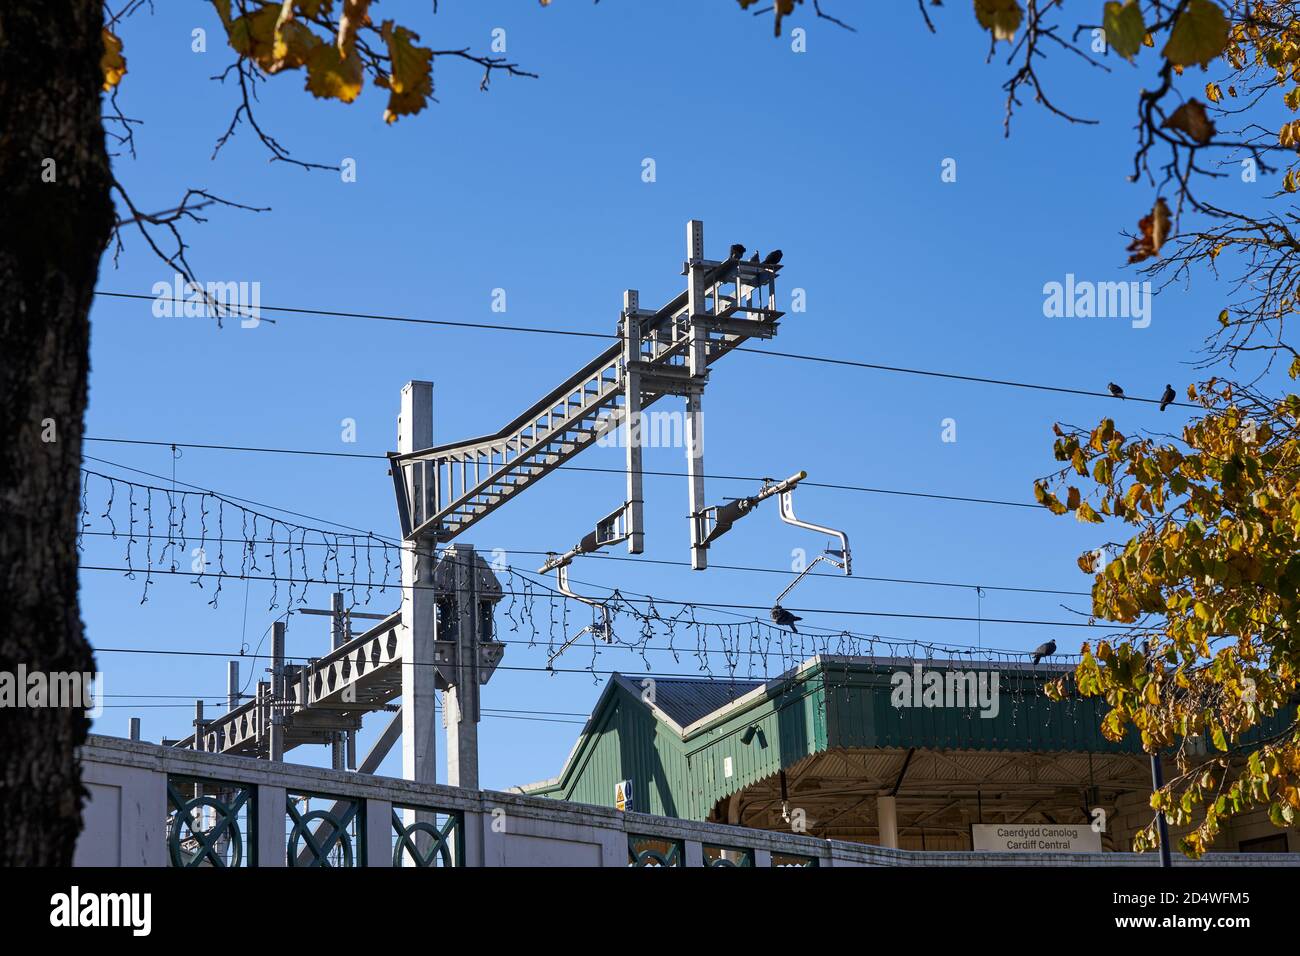 Railway electrification system, Great Western Railway, Cardiff, South Wales Stock Photo